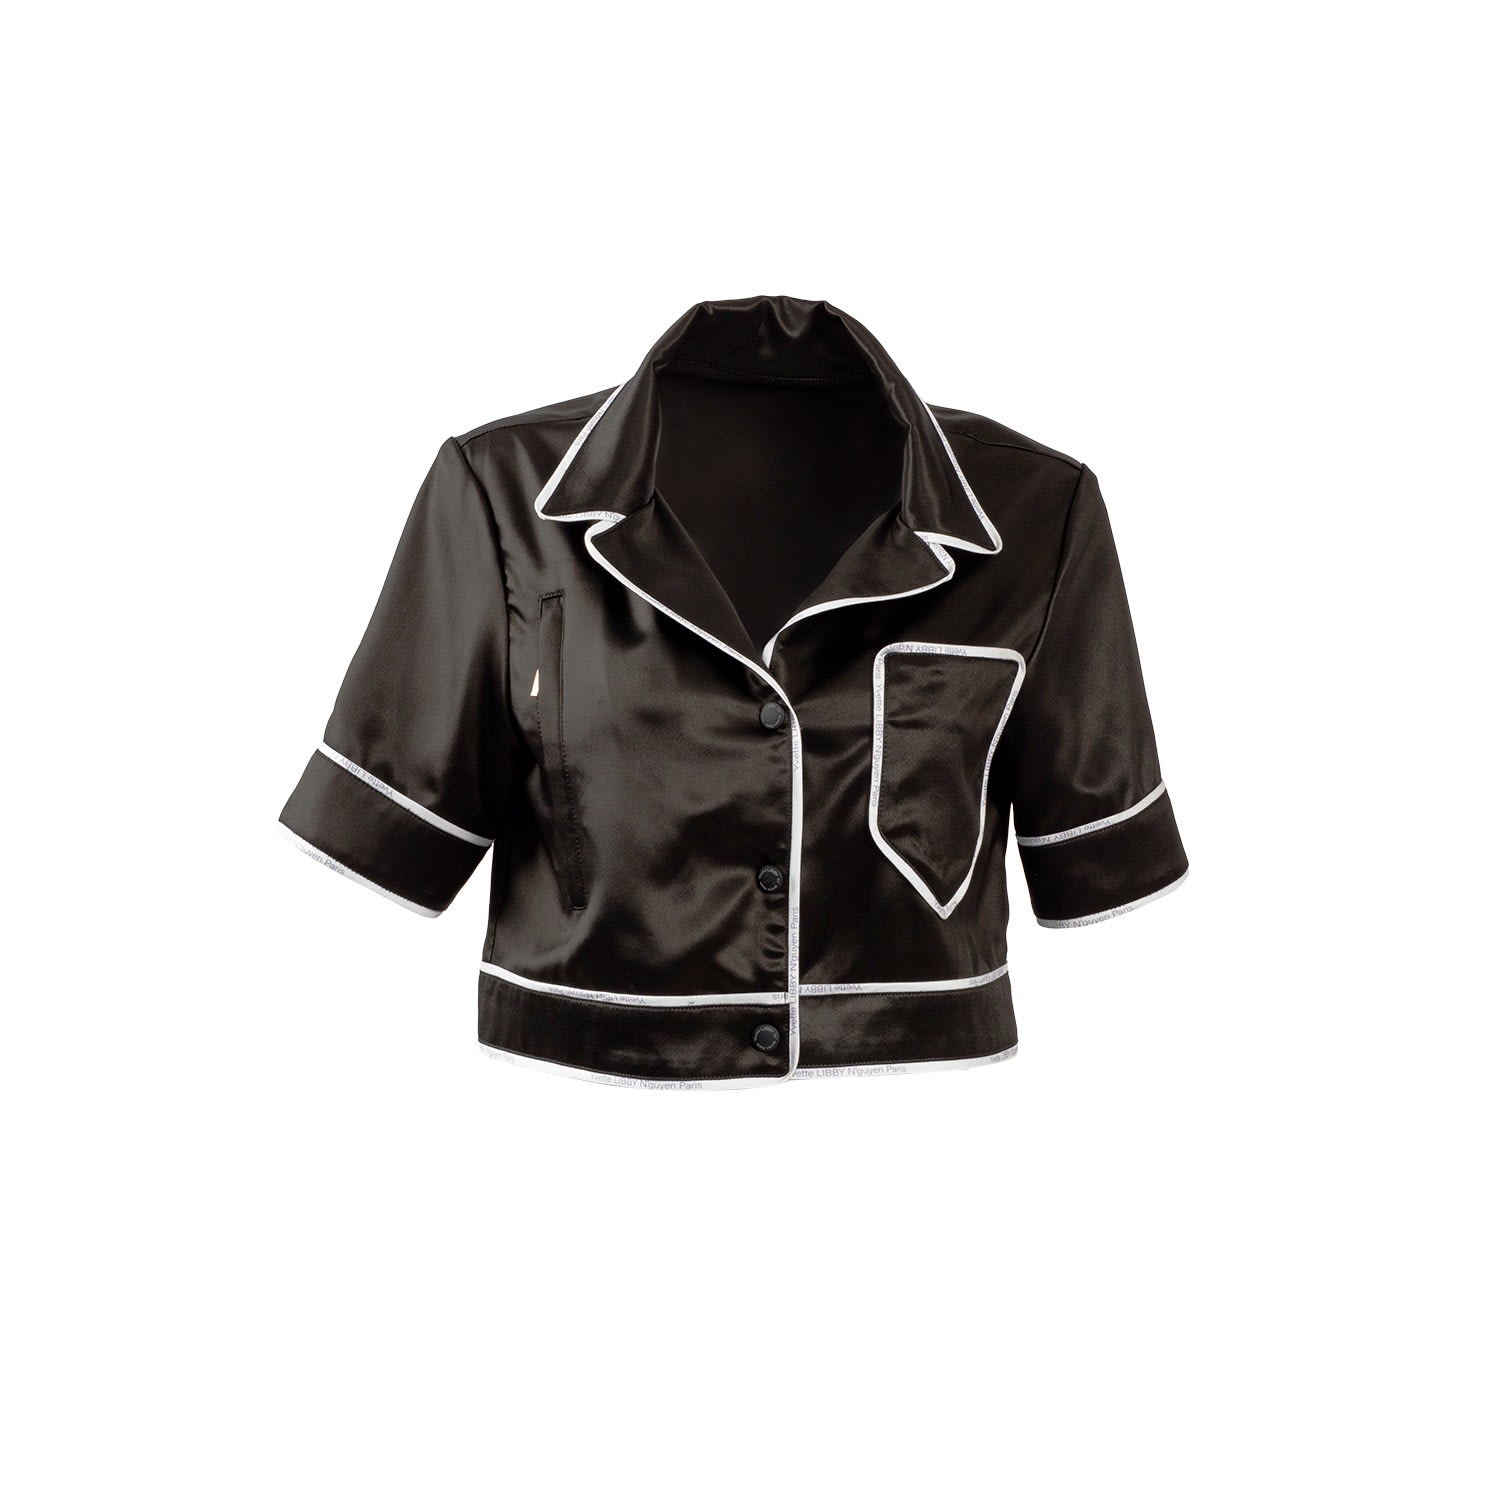 Women Lacquer Silk Short Sleeve Shirt In Loose-Fitting - Pearl Black - Chez Toi Extra Small Yvette LIBBY N'guyen Paris